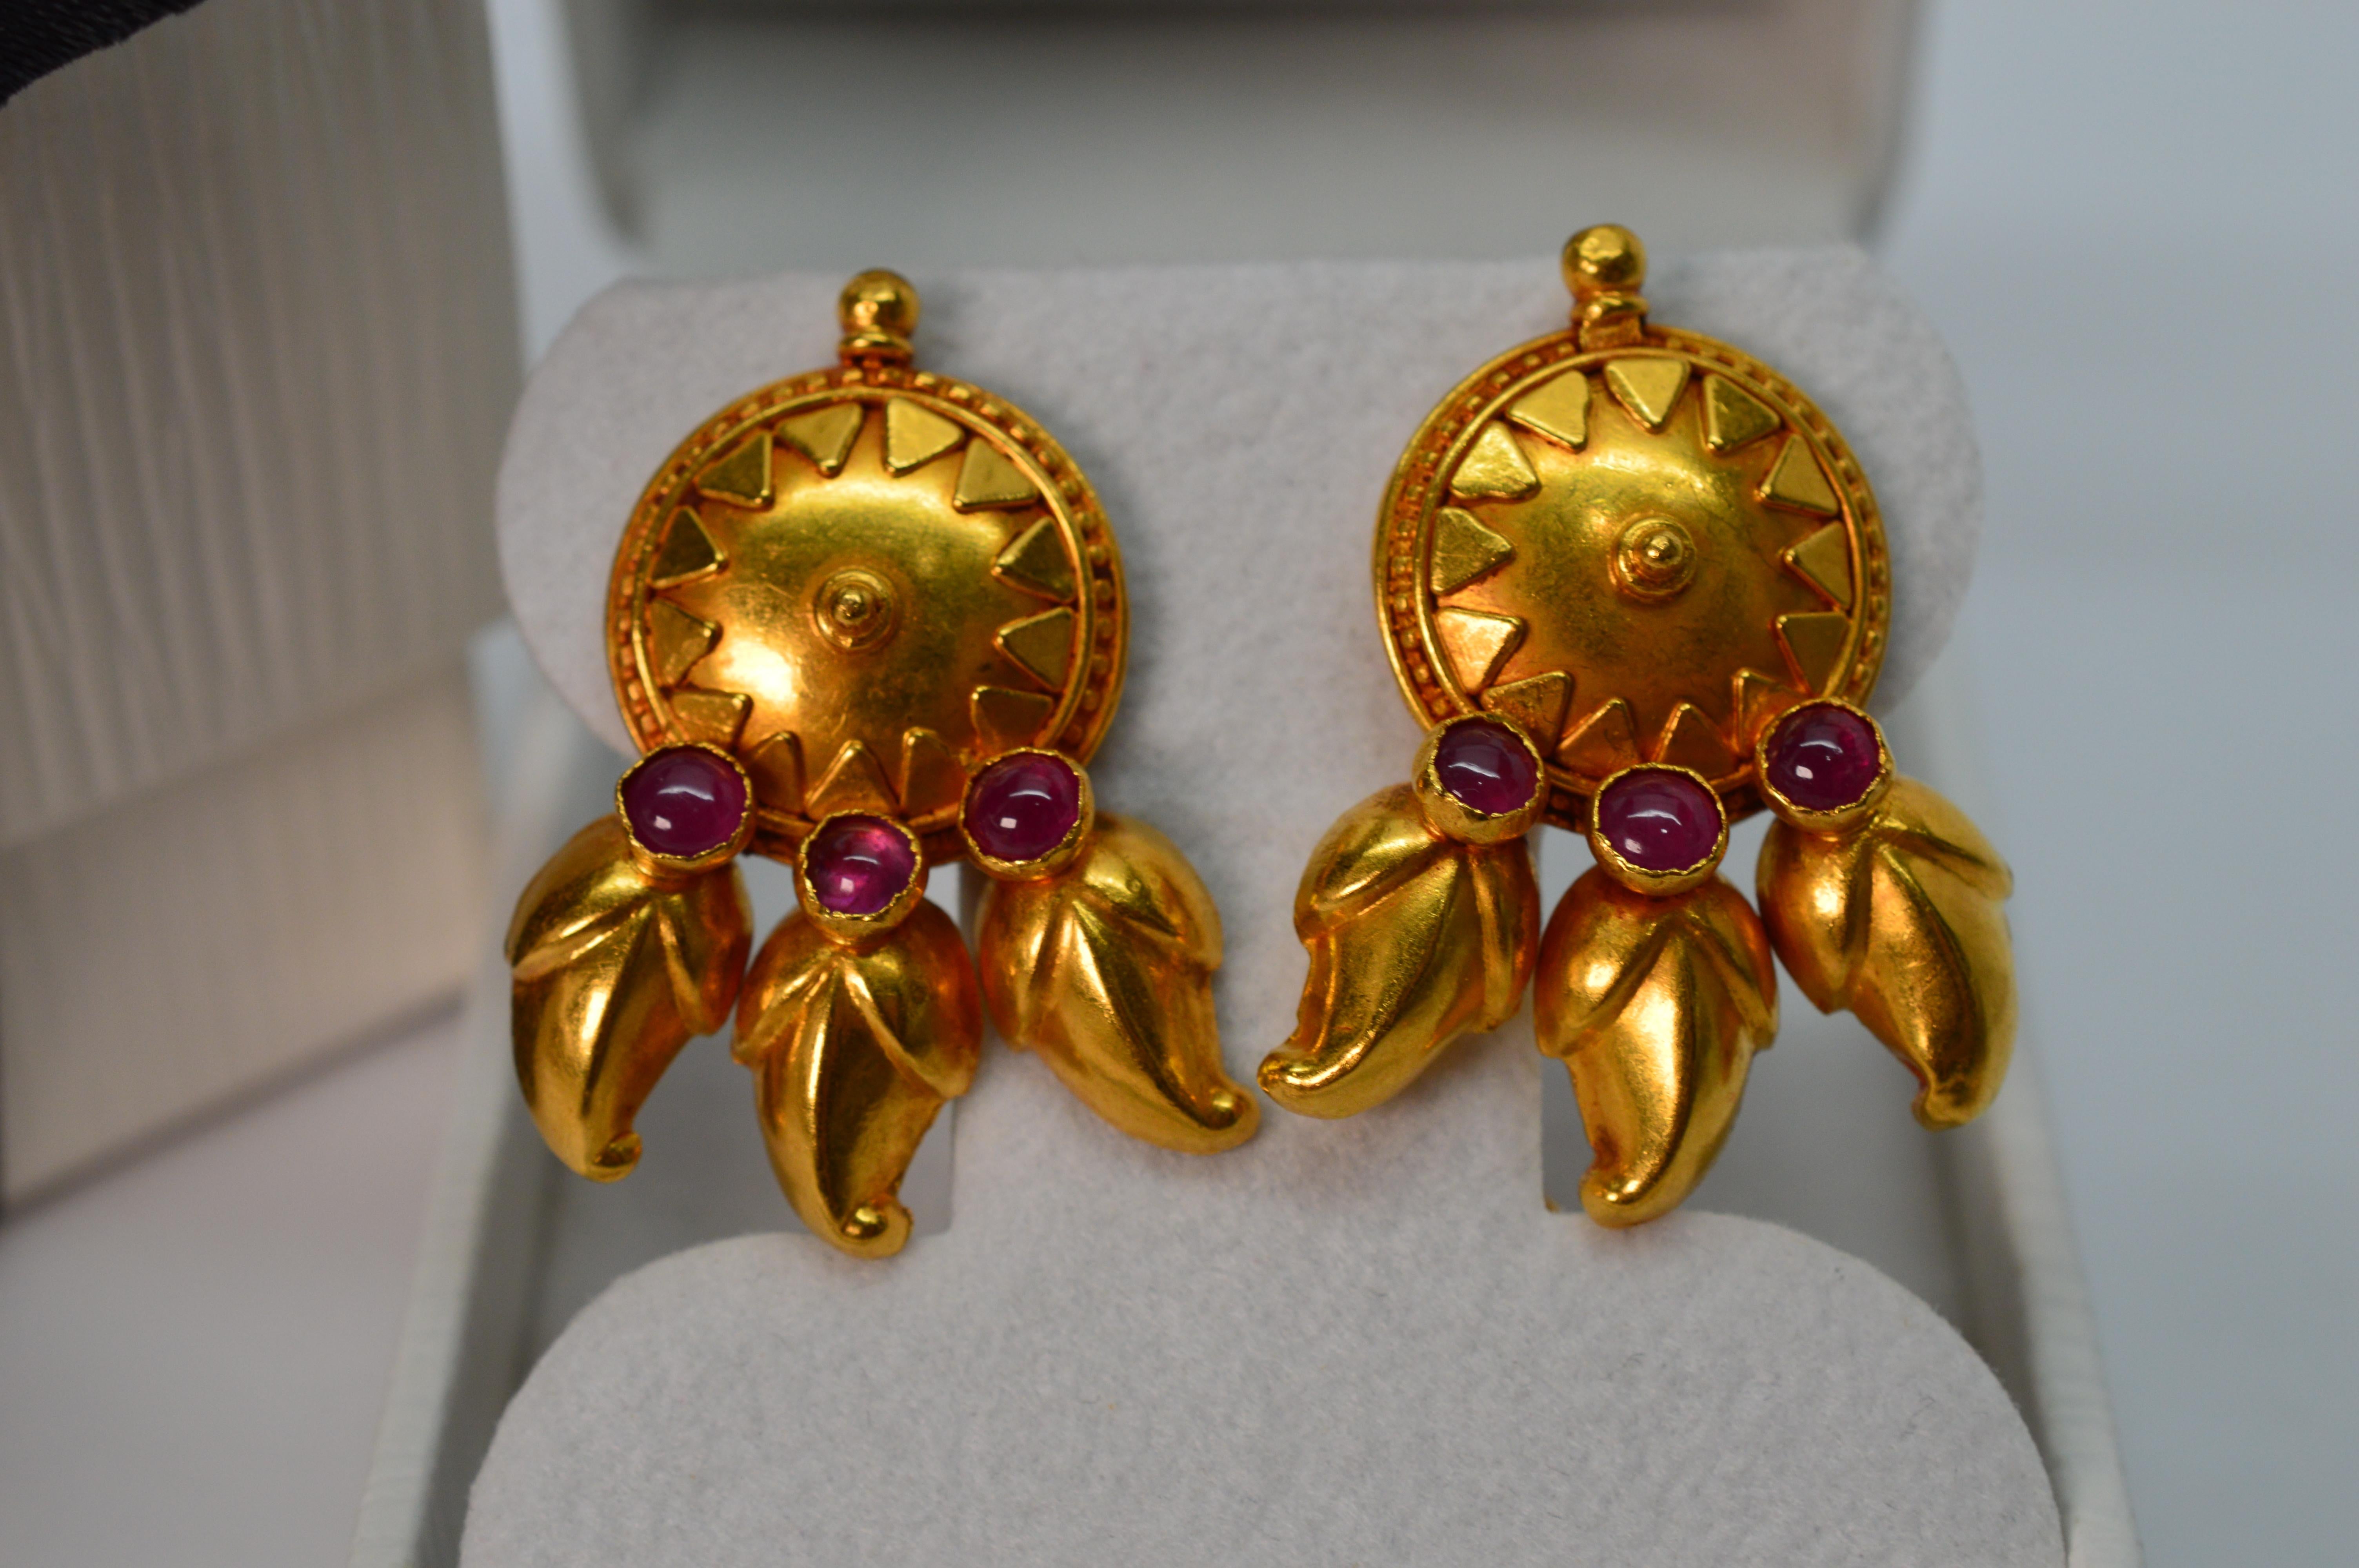 Satin 22 Karat Yellow Gold Medallion Stud Earrings w Ruby Cabochon Accents For Sale 2